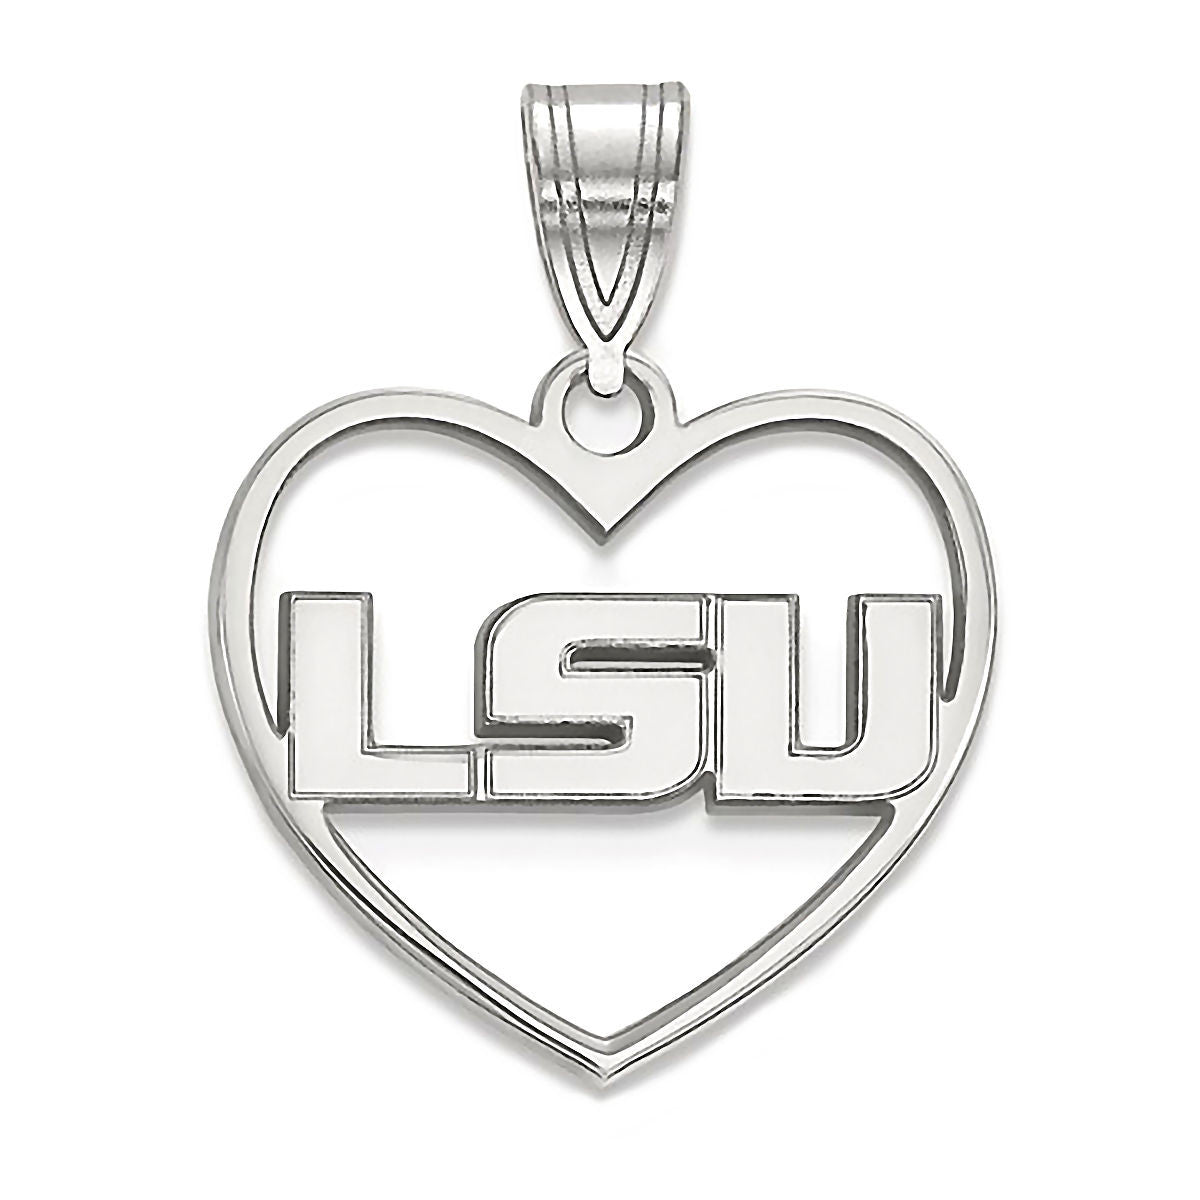 Louisiana State University 925 Sterling Silver Pendant Officially Licensed